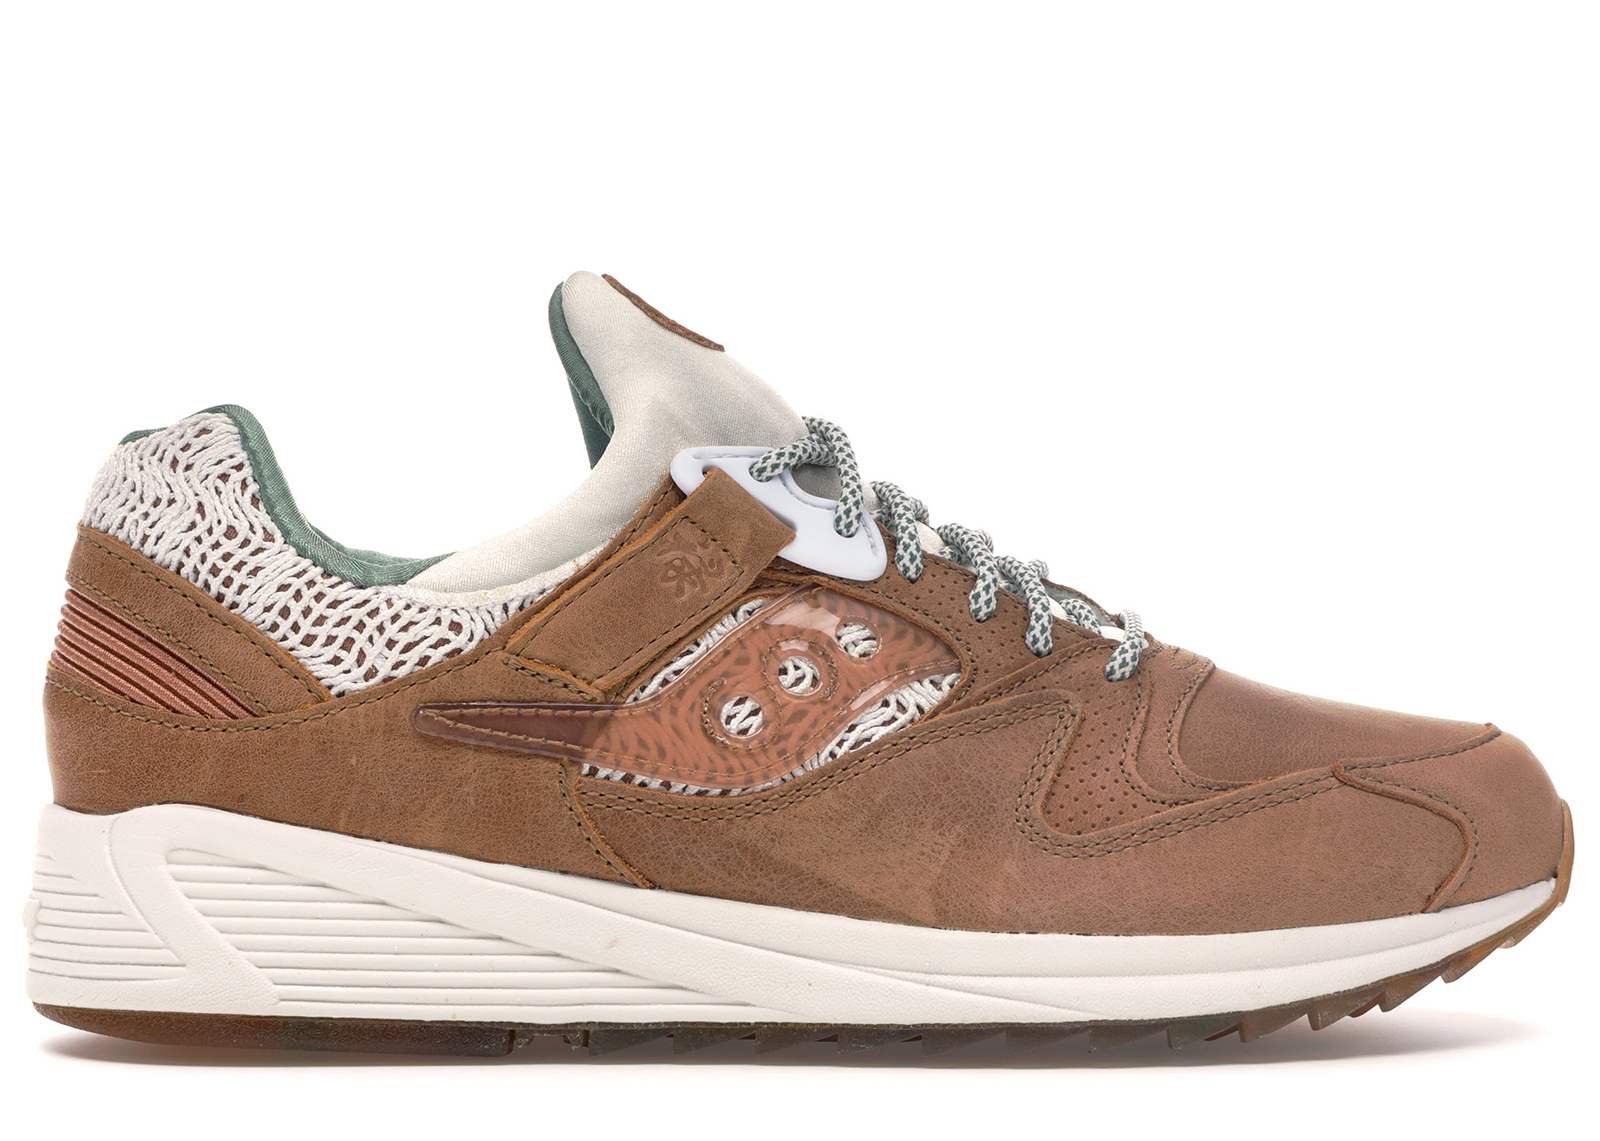 saucony grid 8500 trainers with gum sole